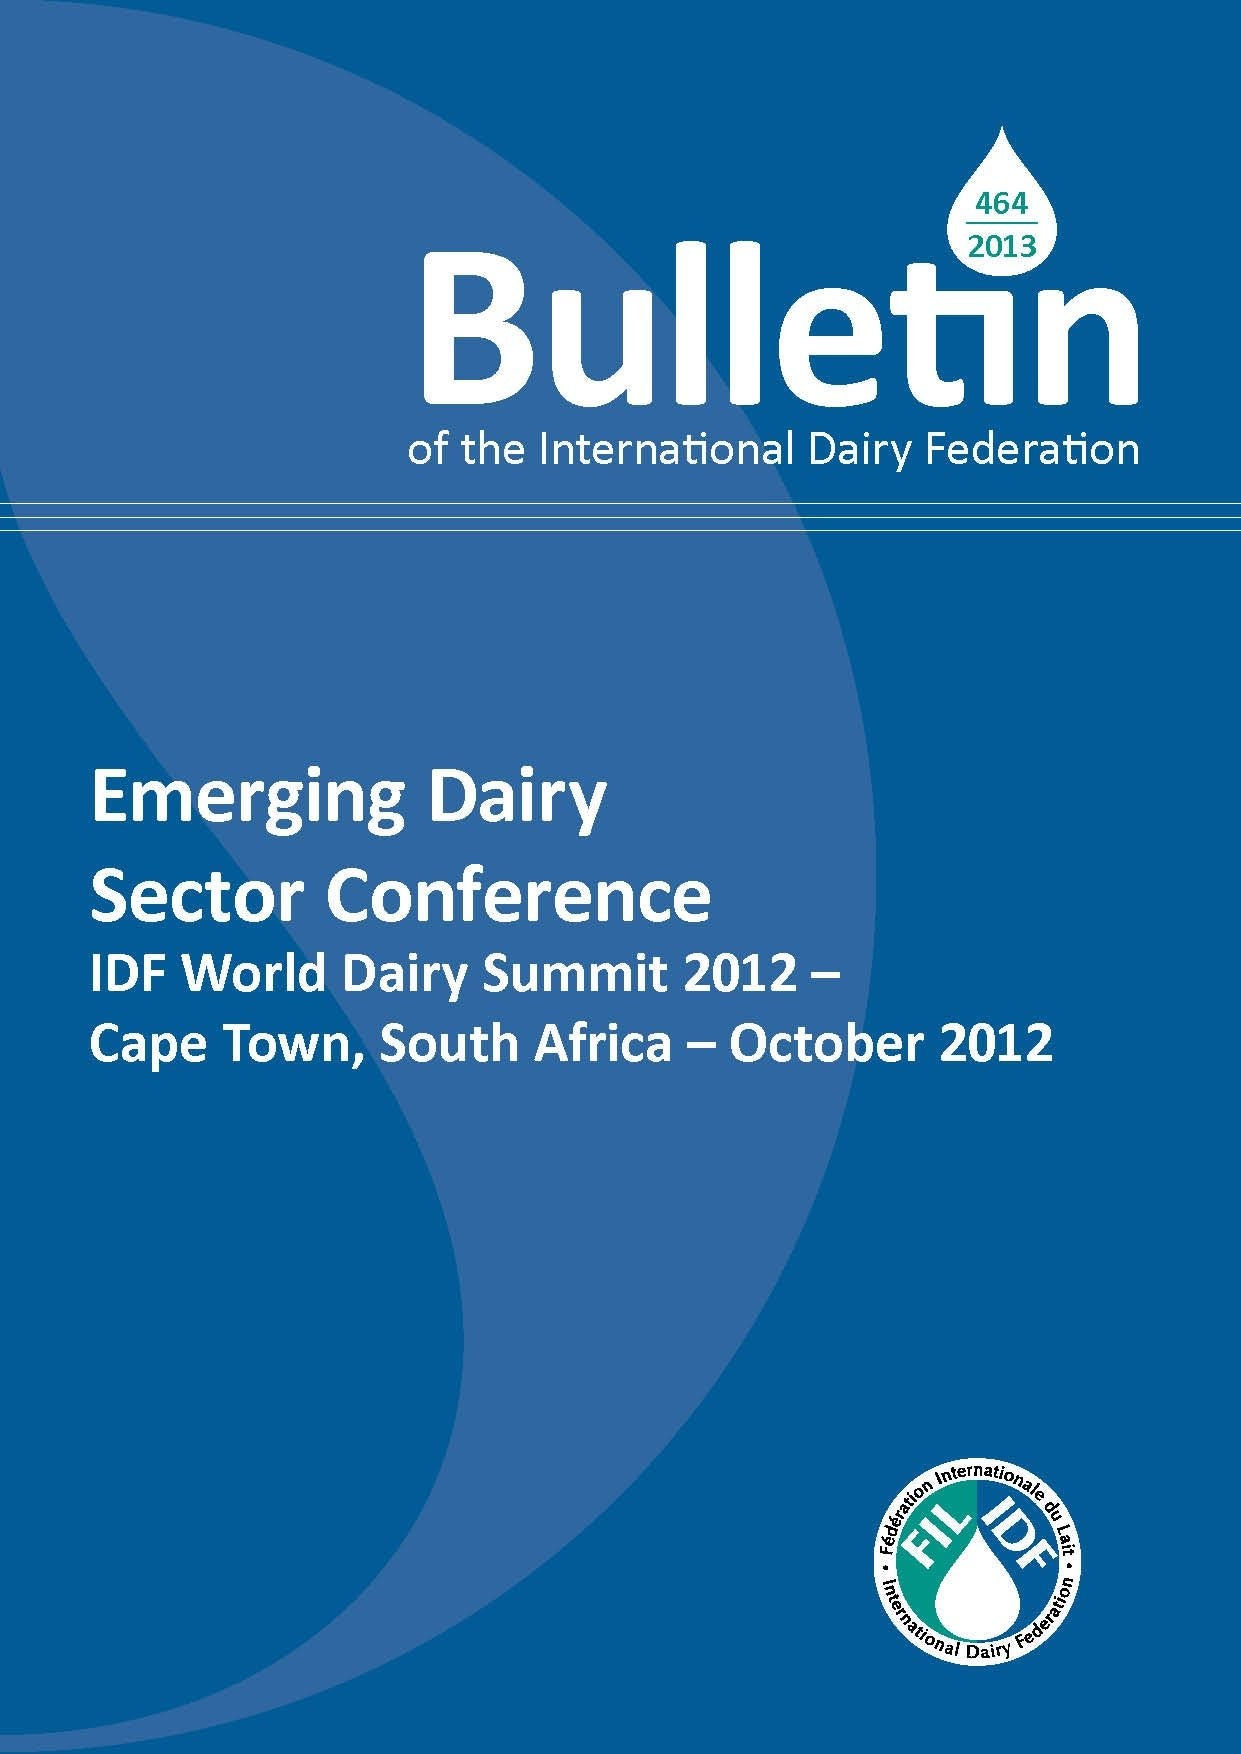 Bulletin of the IDF N° 464/ 2013: Emerging Dairy Sector Conference, IDF World Dairy Summit 2012 - Cape Town, South Africa - October 2012 - FIL-IDF